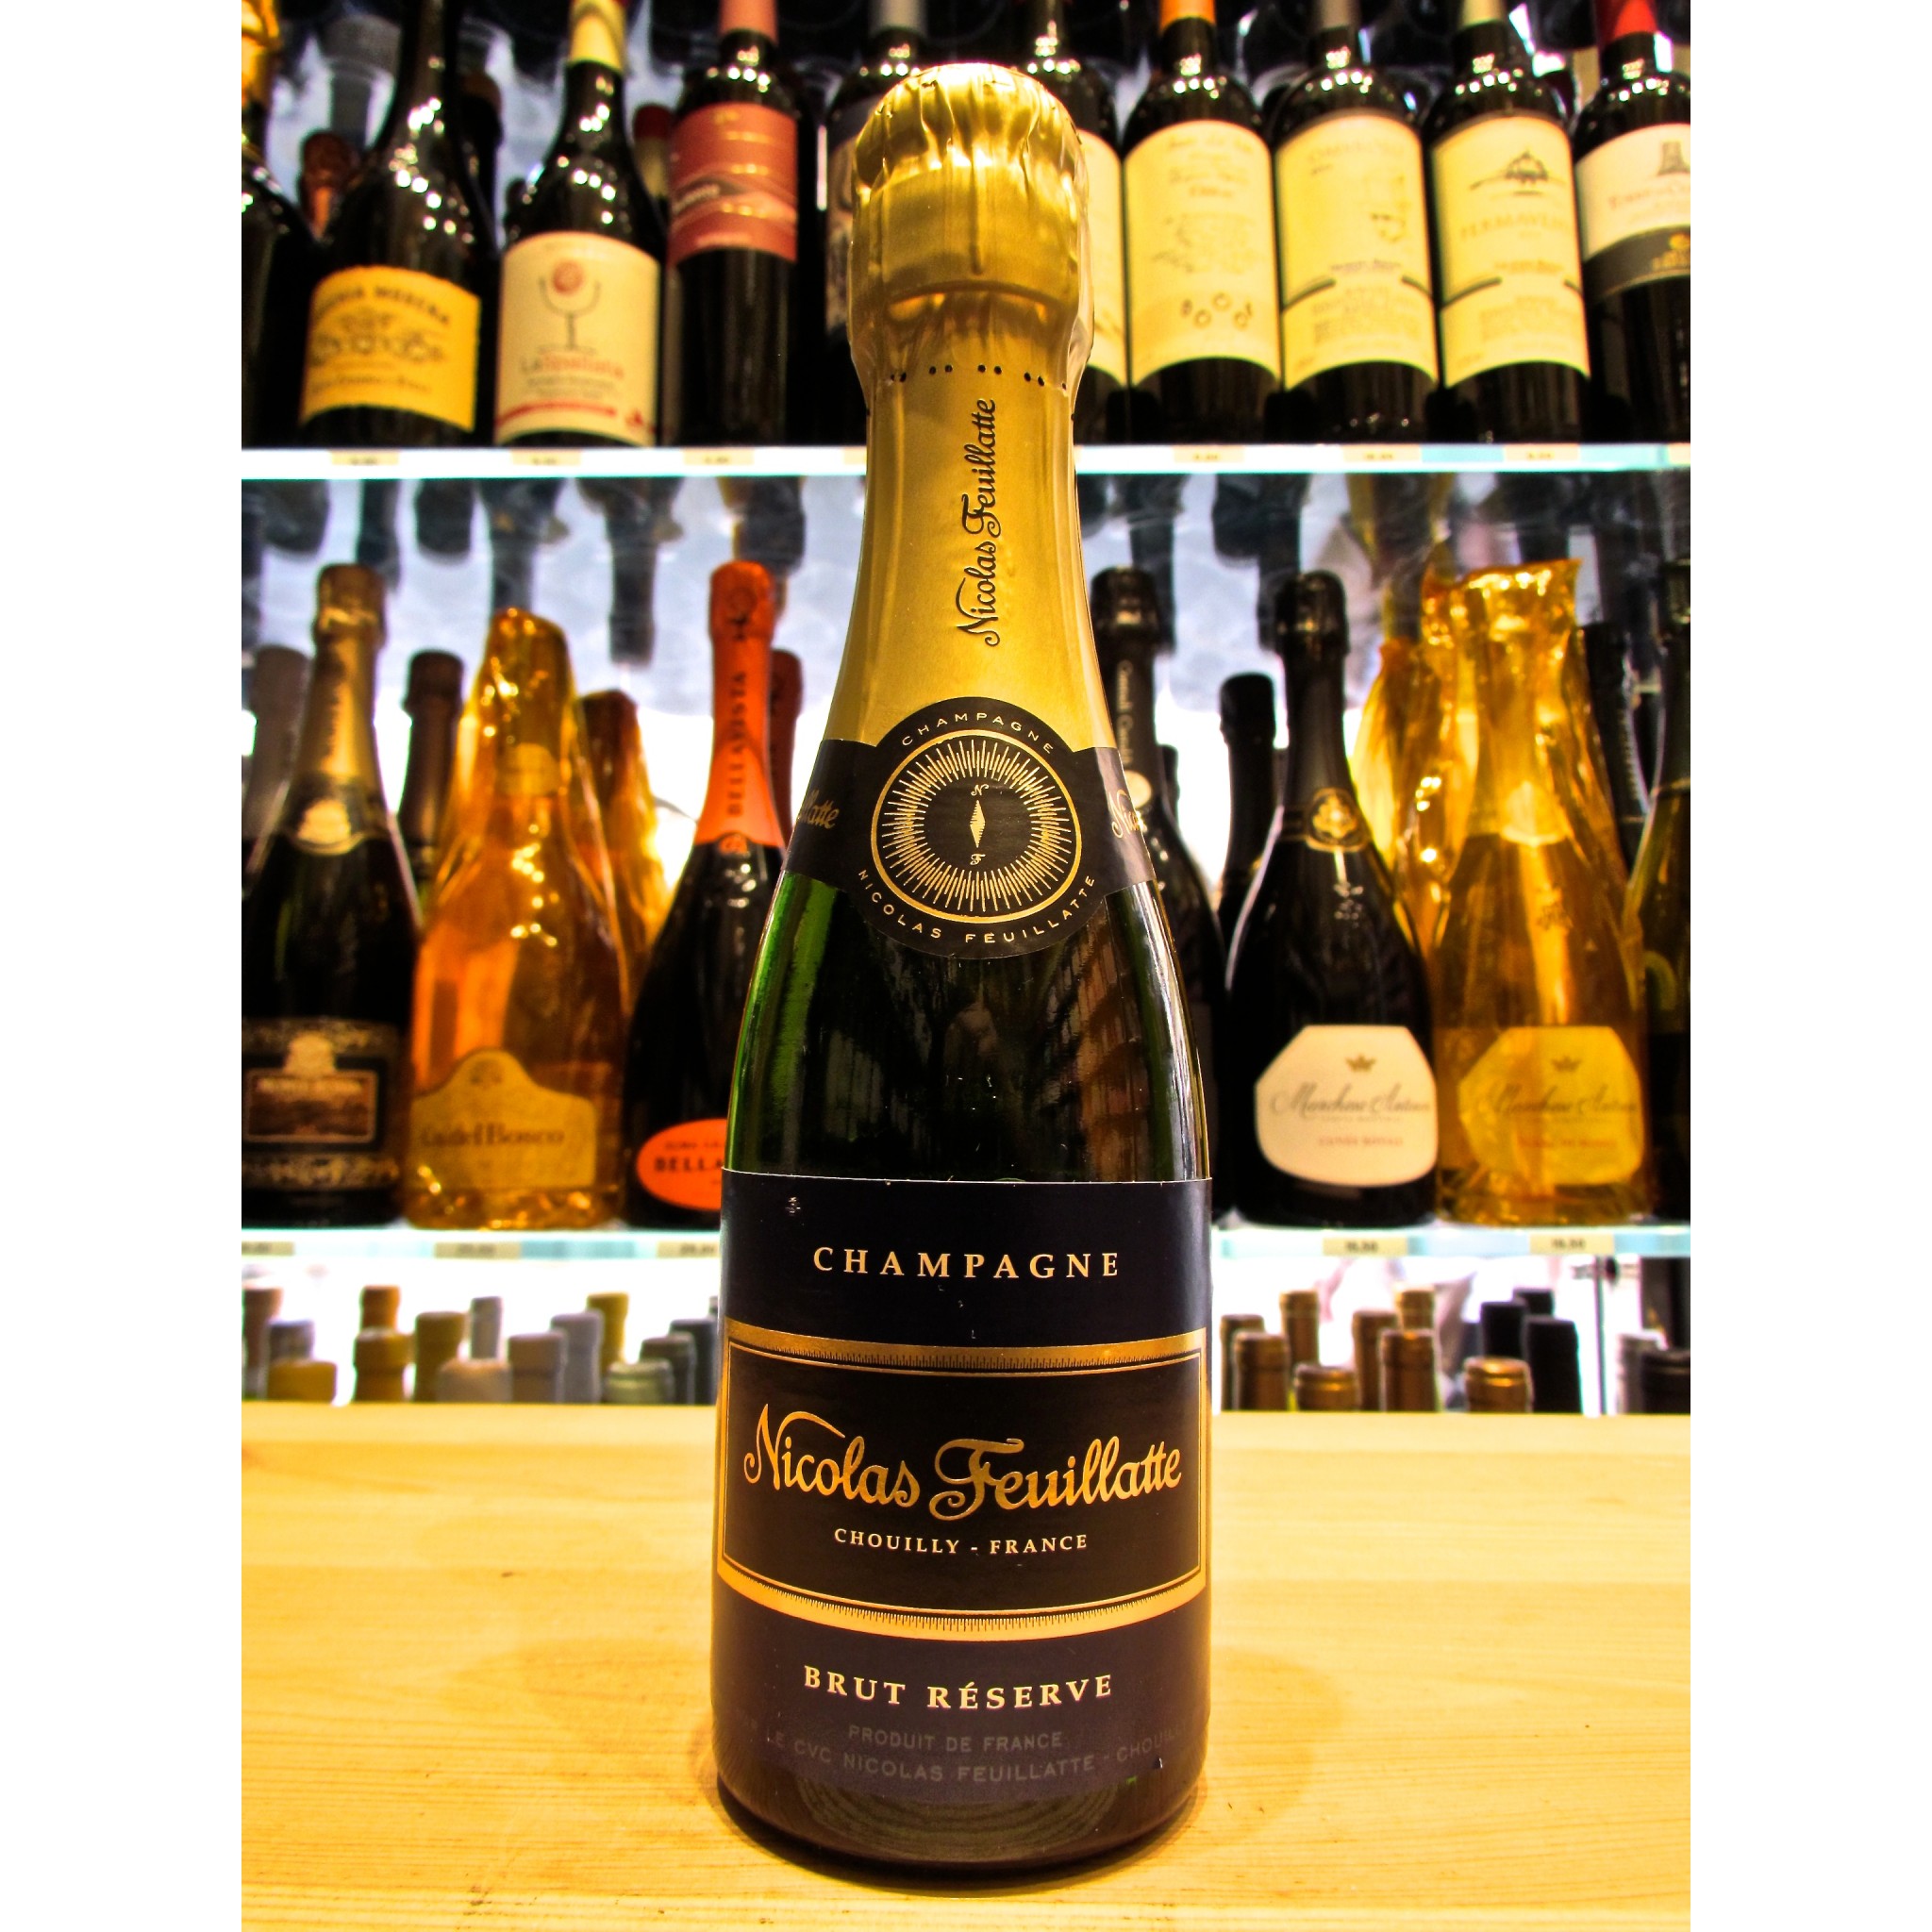 Nicolas Champagne champagne French best quality Online sale Feuillatte shop Online Réserve. Brut at price the